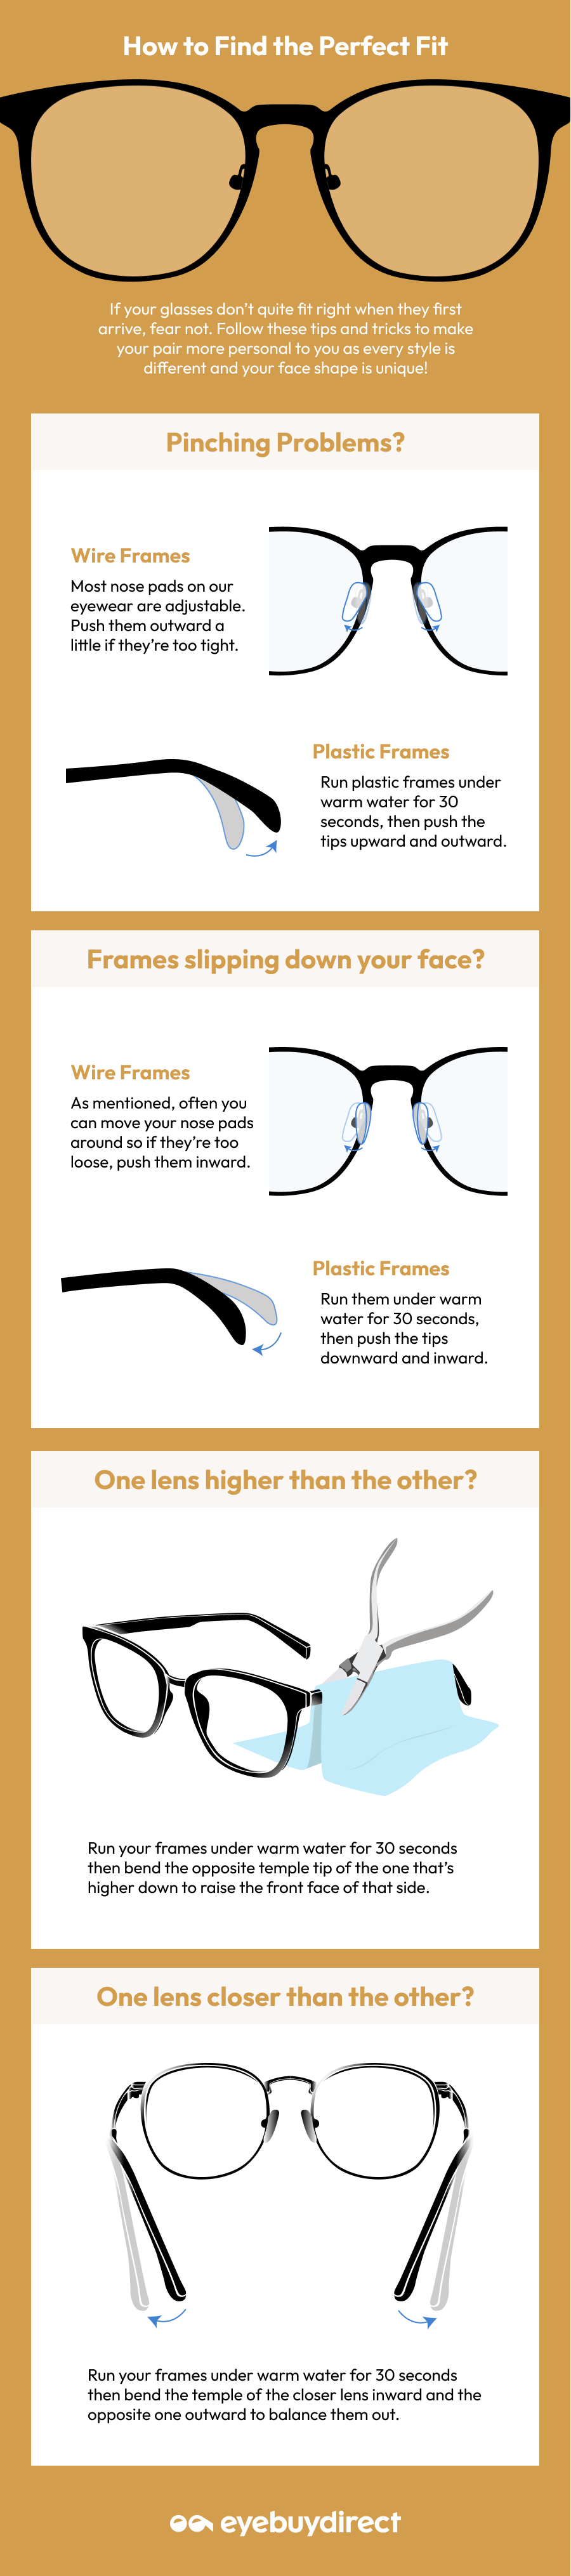 An infographic showing how to fix bent eyeglasses